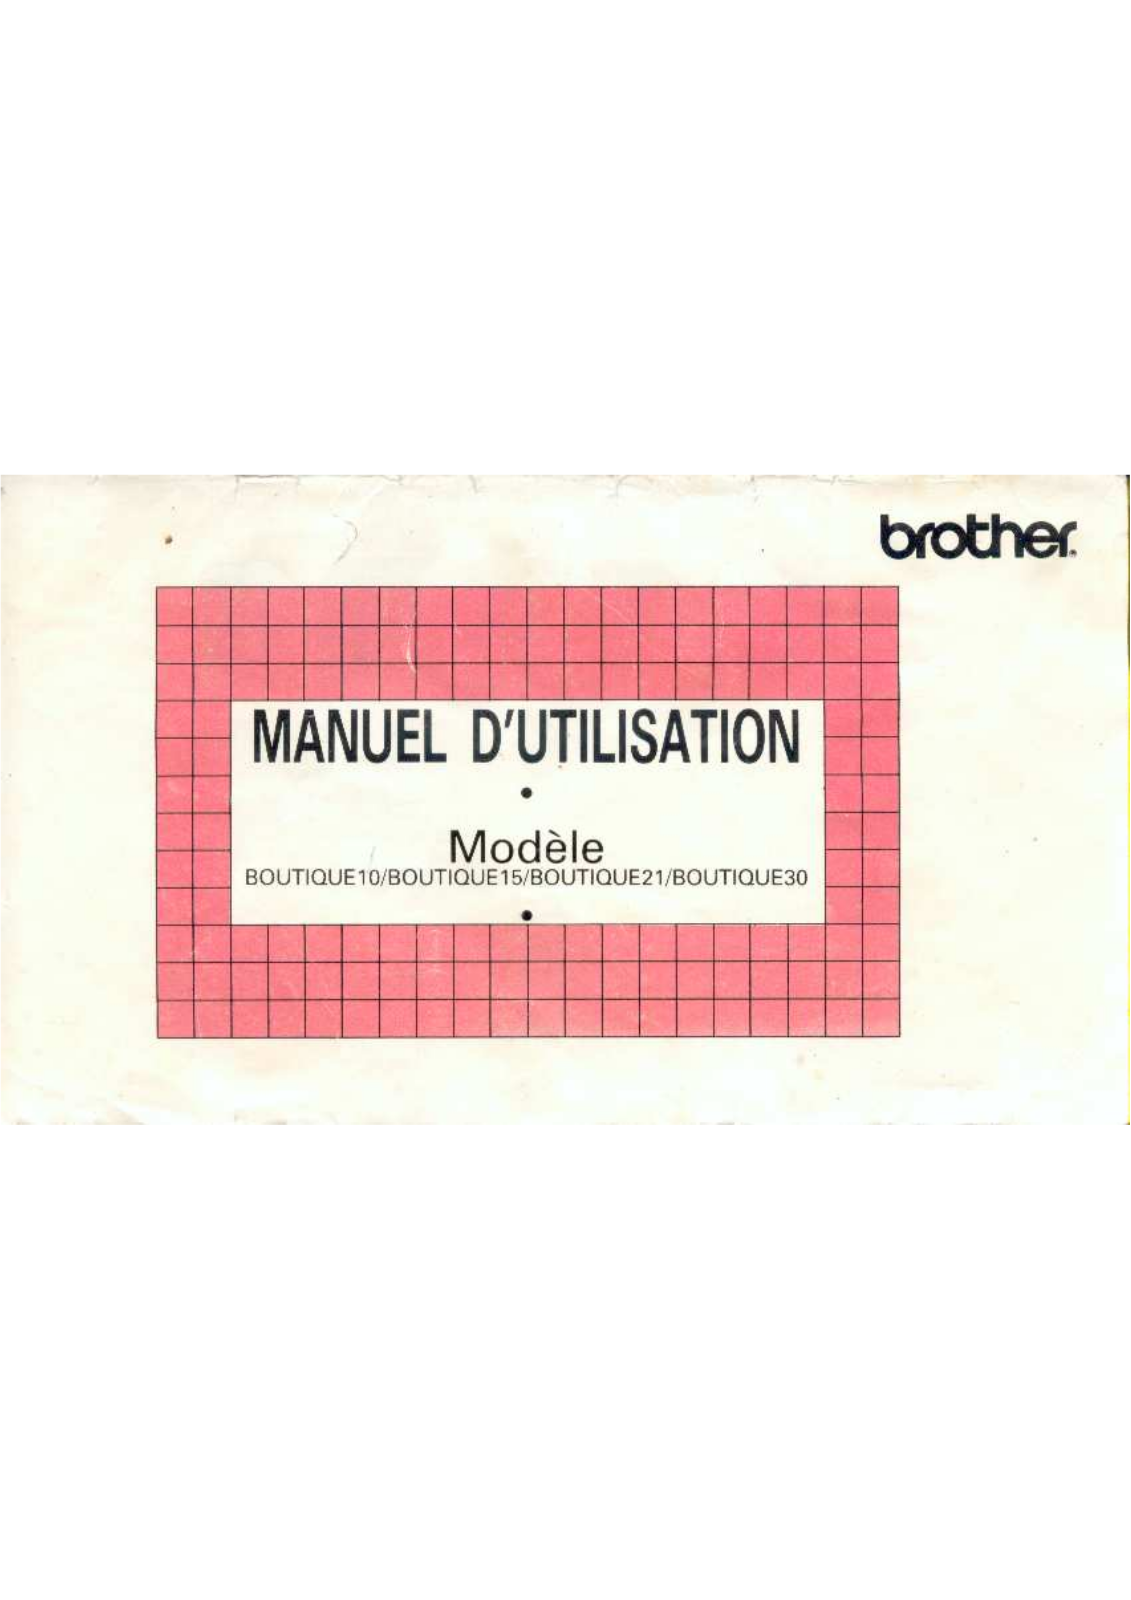 BROTHER BOUTIQUE 10 User Manual